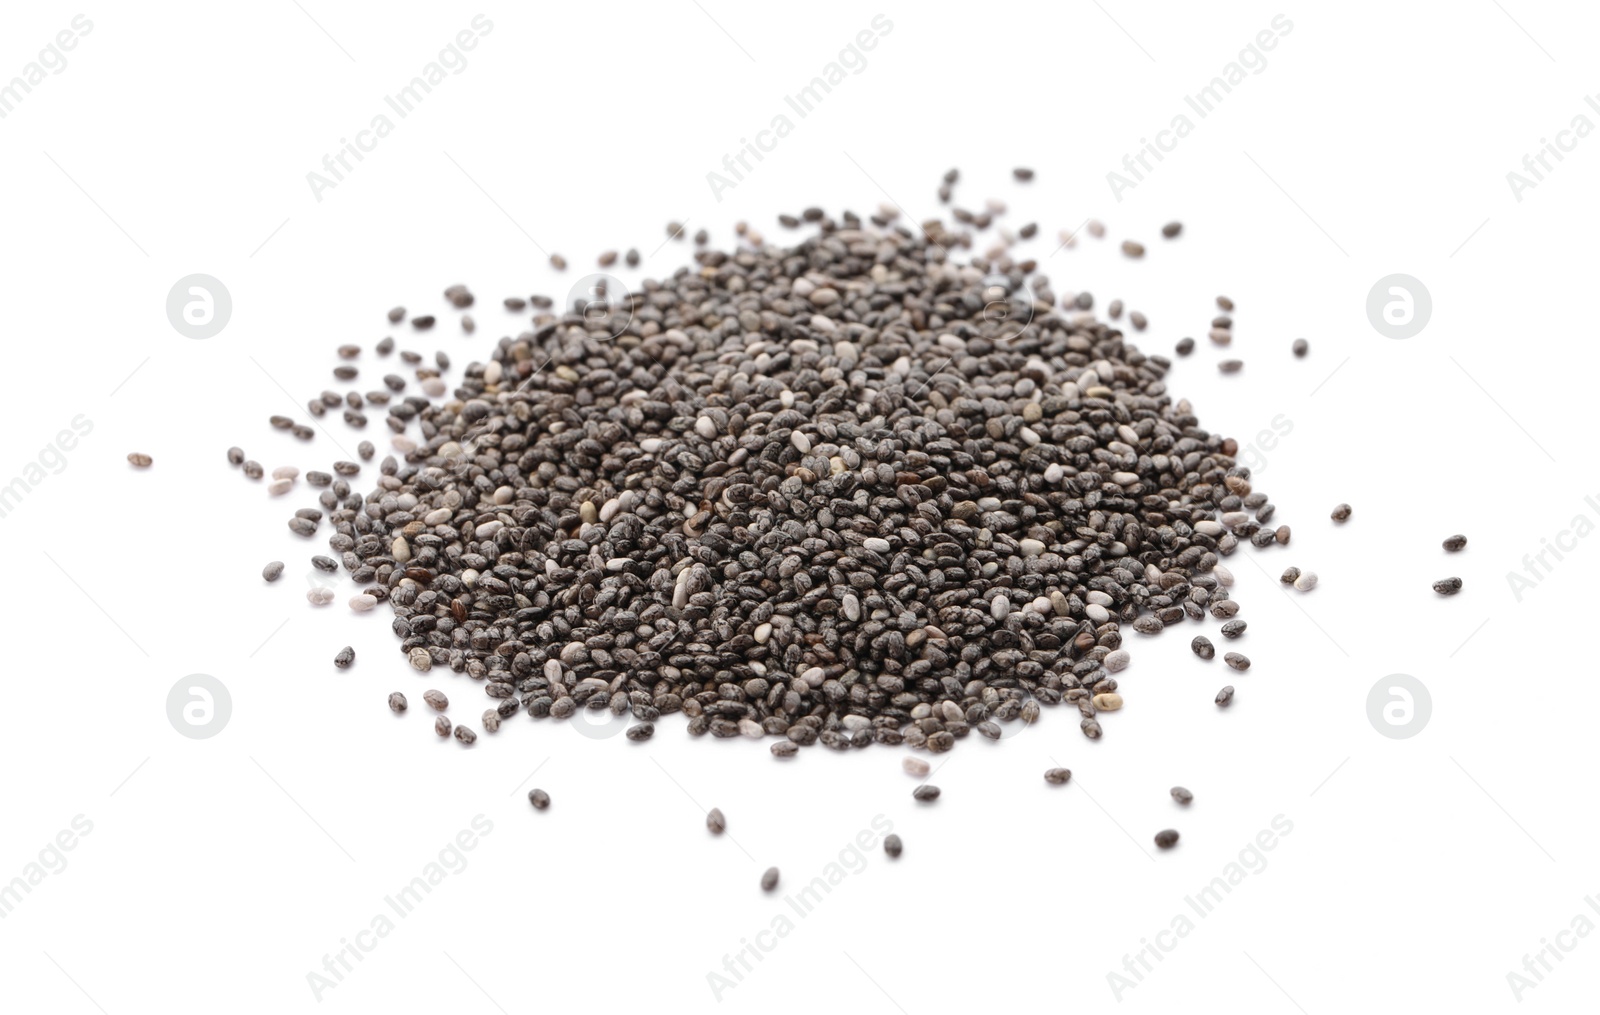 Photo of Pile of chia seeds on white background